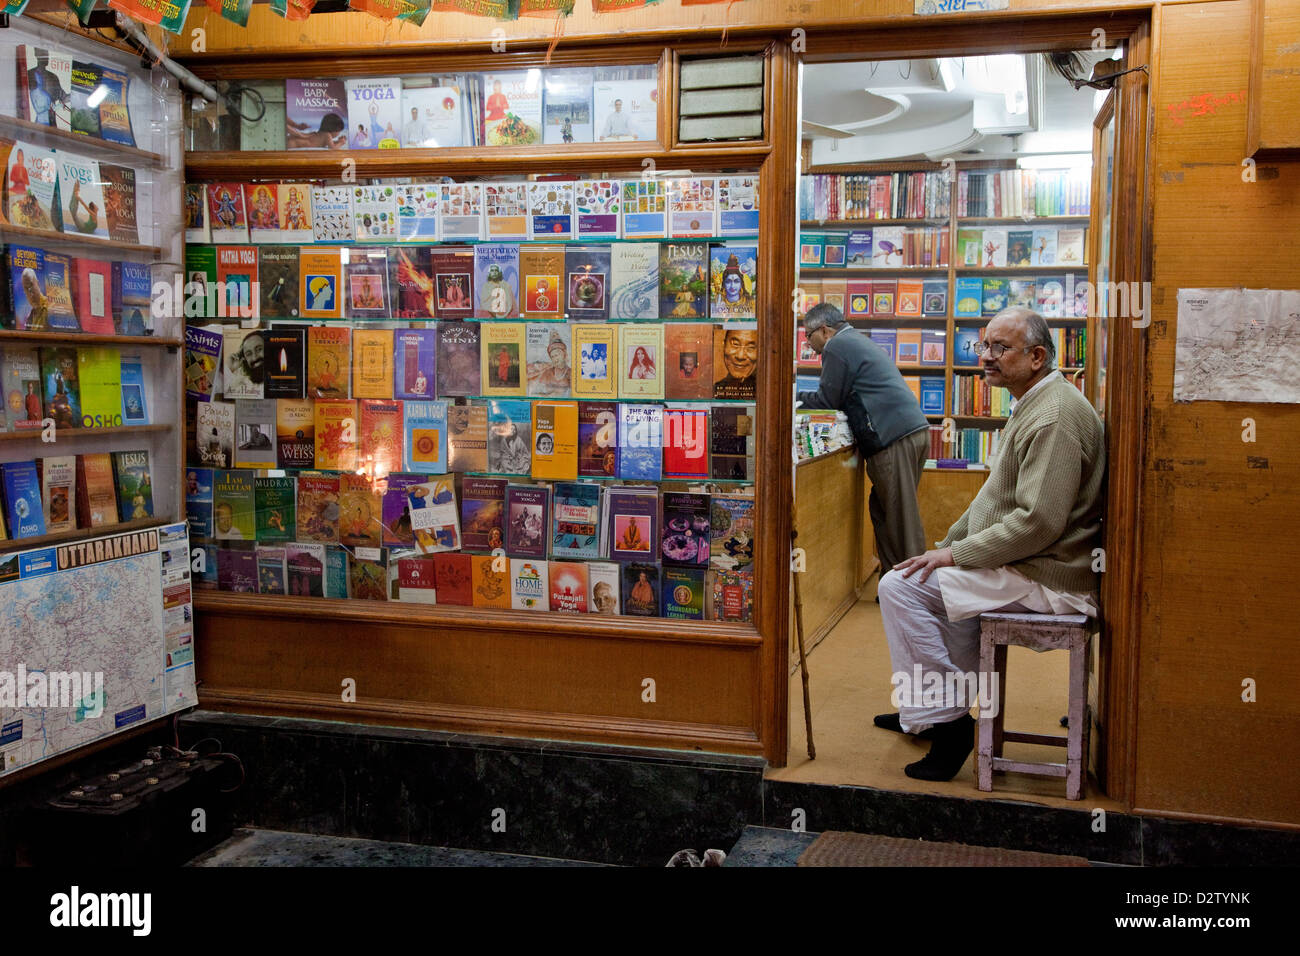 India, Rishikesh. Book Store of Indian Philosophy, Yoga, and Religion. Stock Photo